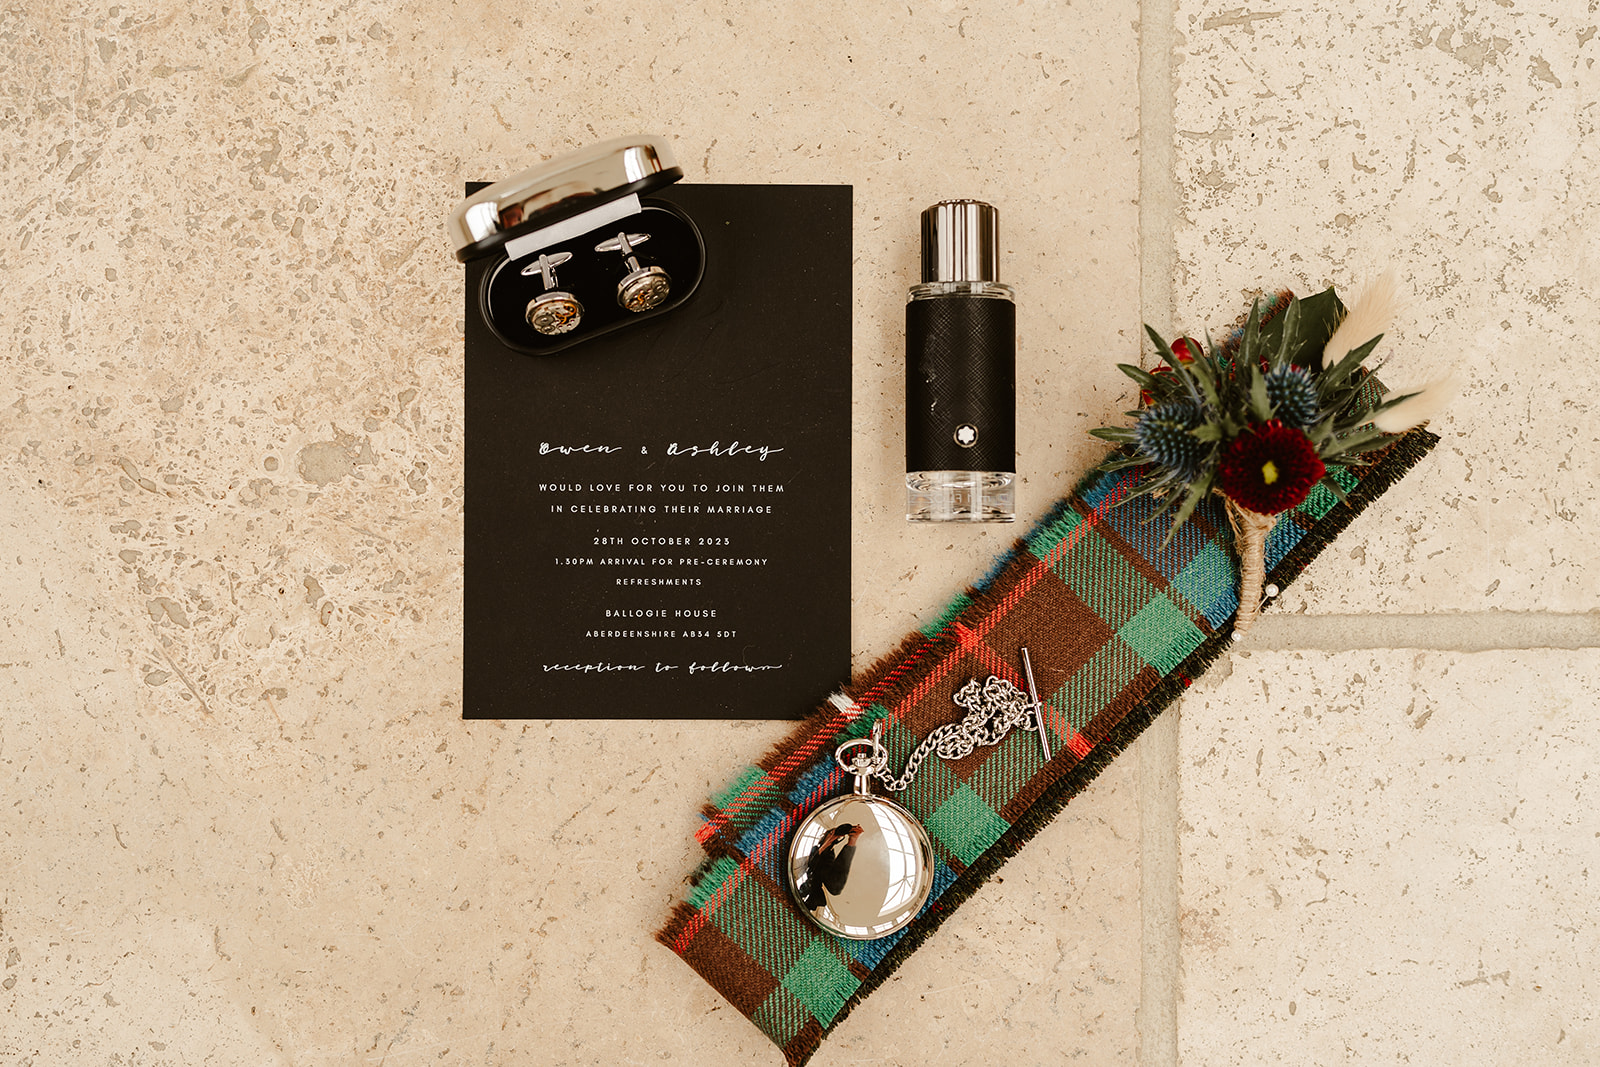 wedding details includes grooms cuff links, rings, pocket watch and tartan fabric